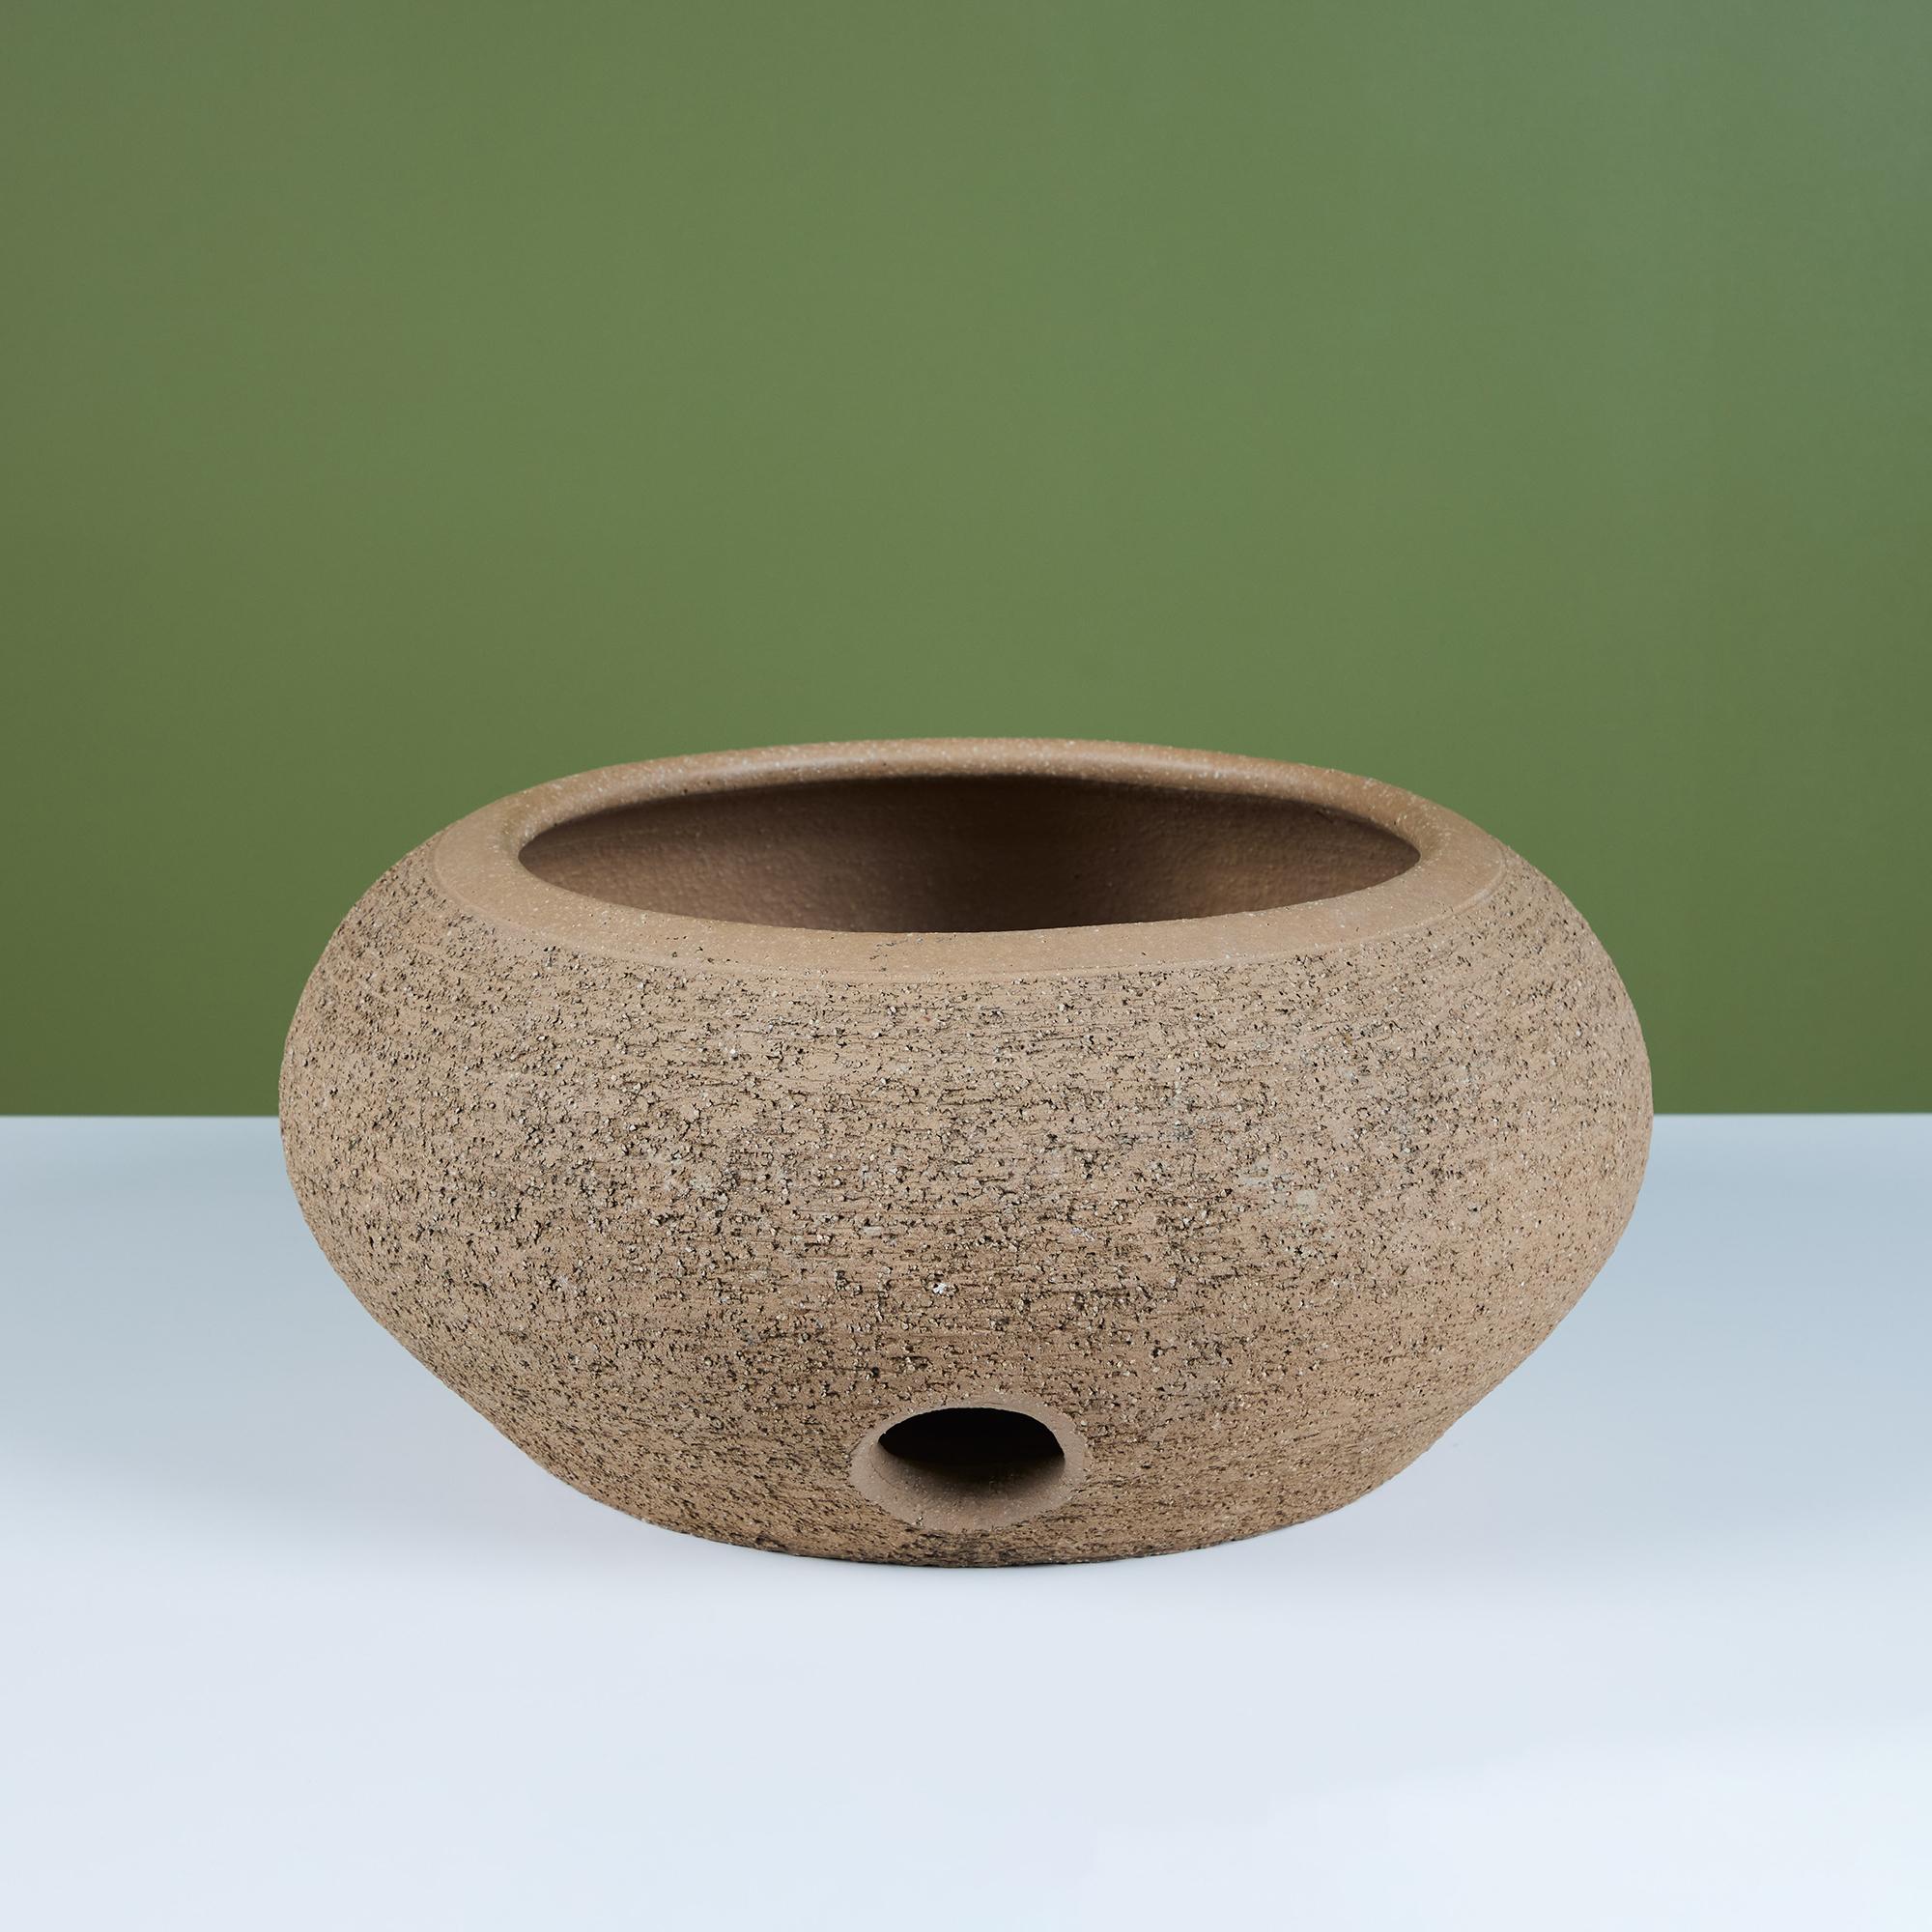 Round hand formed pot by California artist Stan Bitters for Hans Sumpf, c.1970s, USA. This clay pot features a raised center in which to wrap a garden hose around. It's a discreet and beautiful way to store your hose.
Signed on the